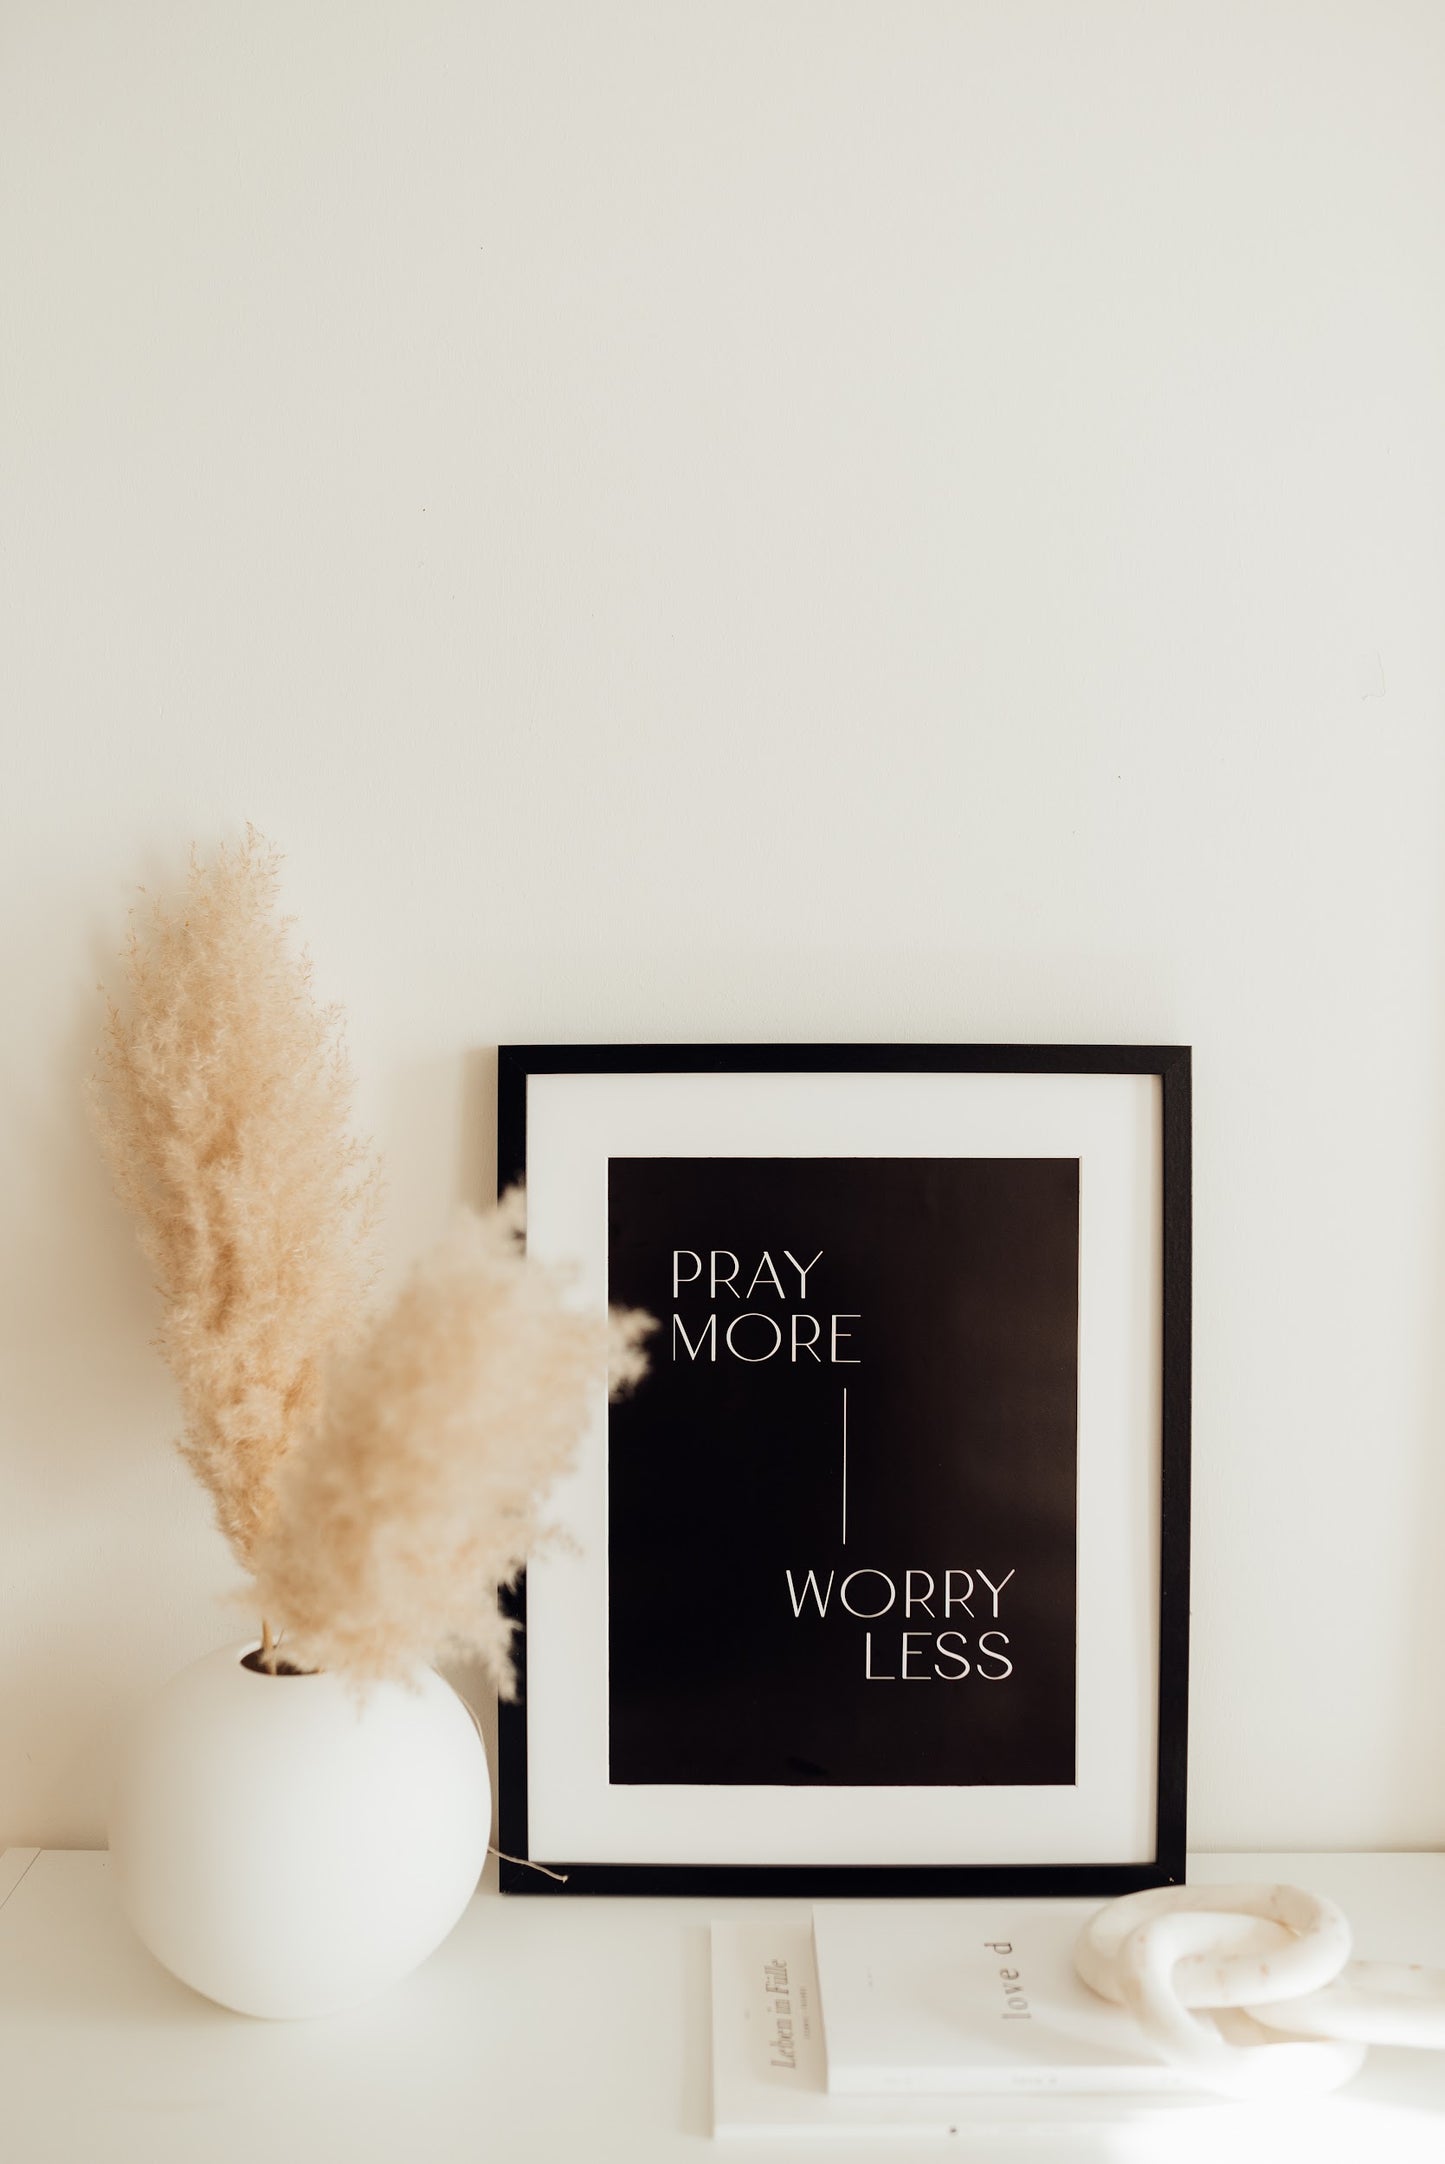 Pray more worry less - A3 Poster